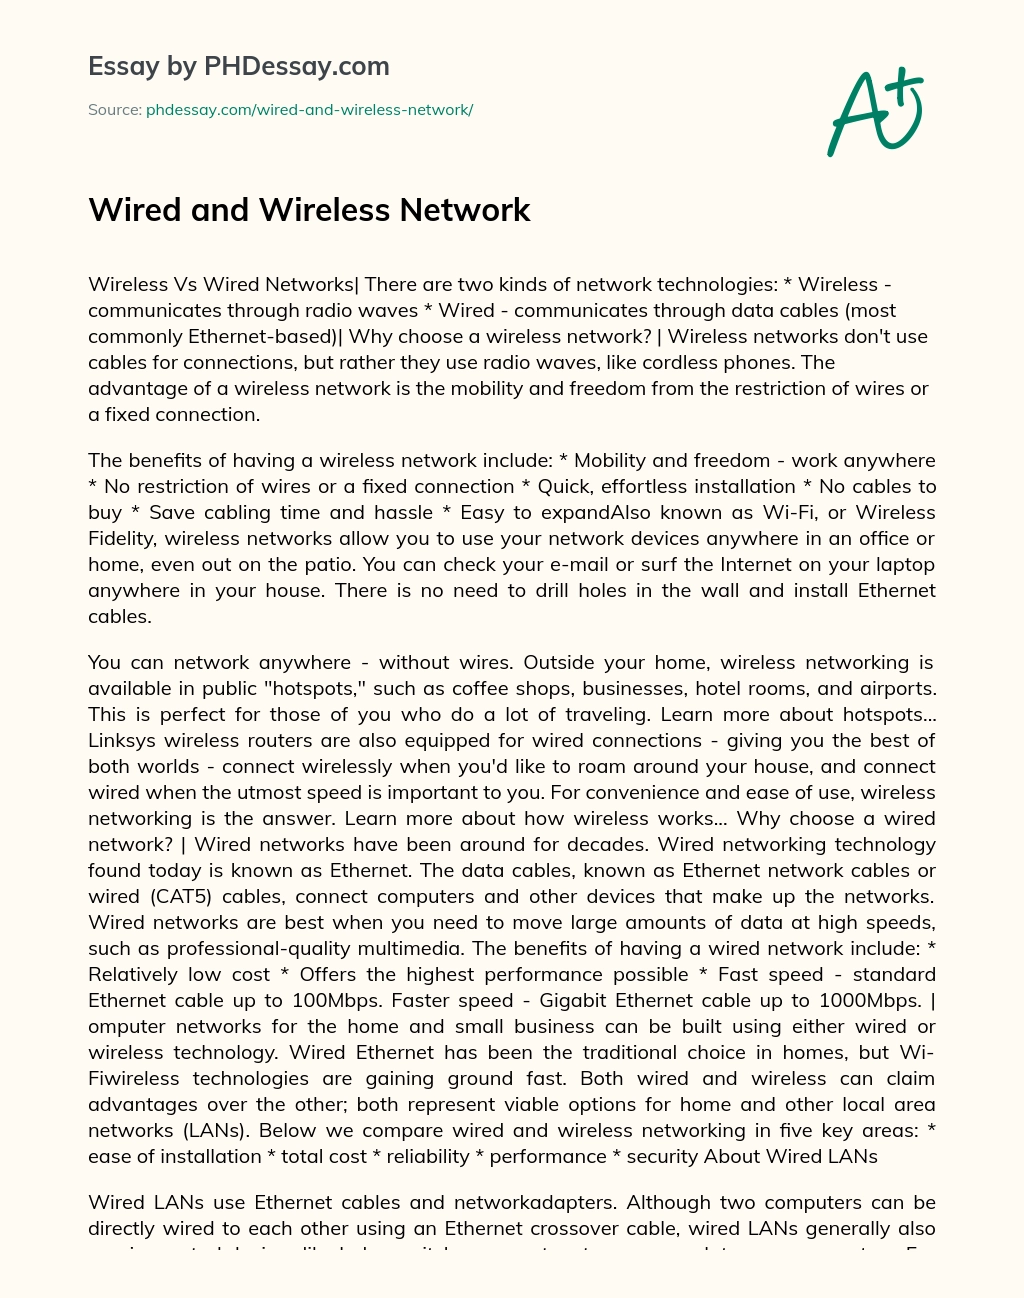 Wired and Wireless Network essay